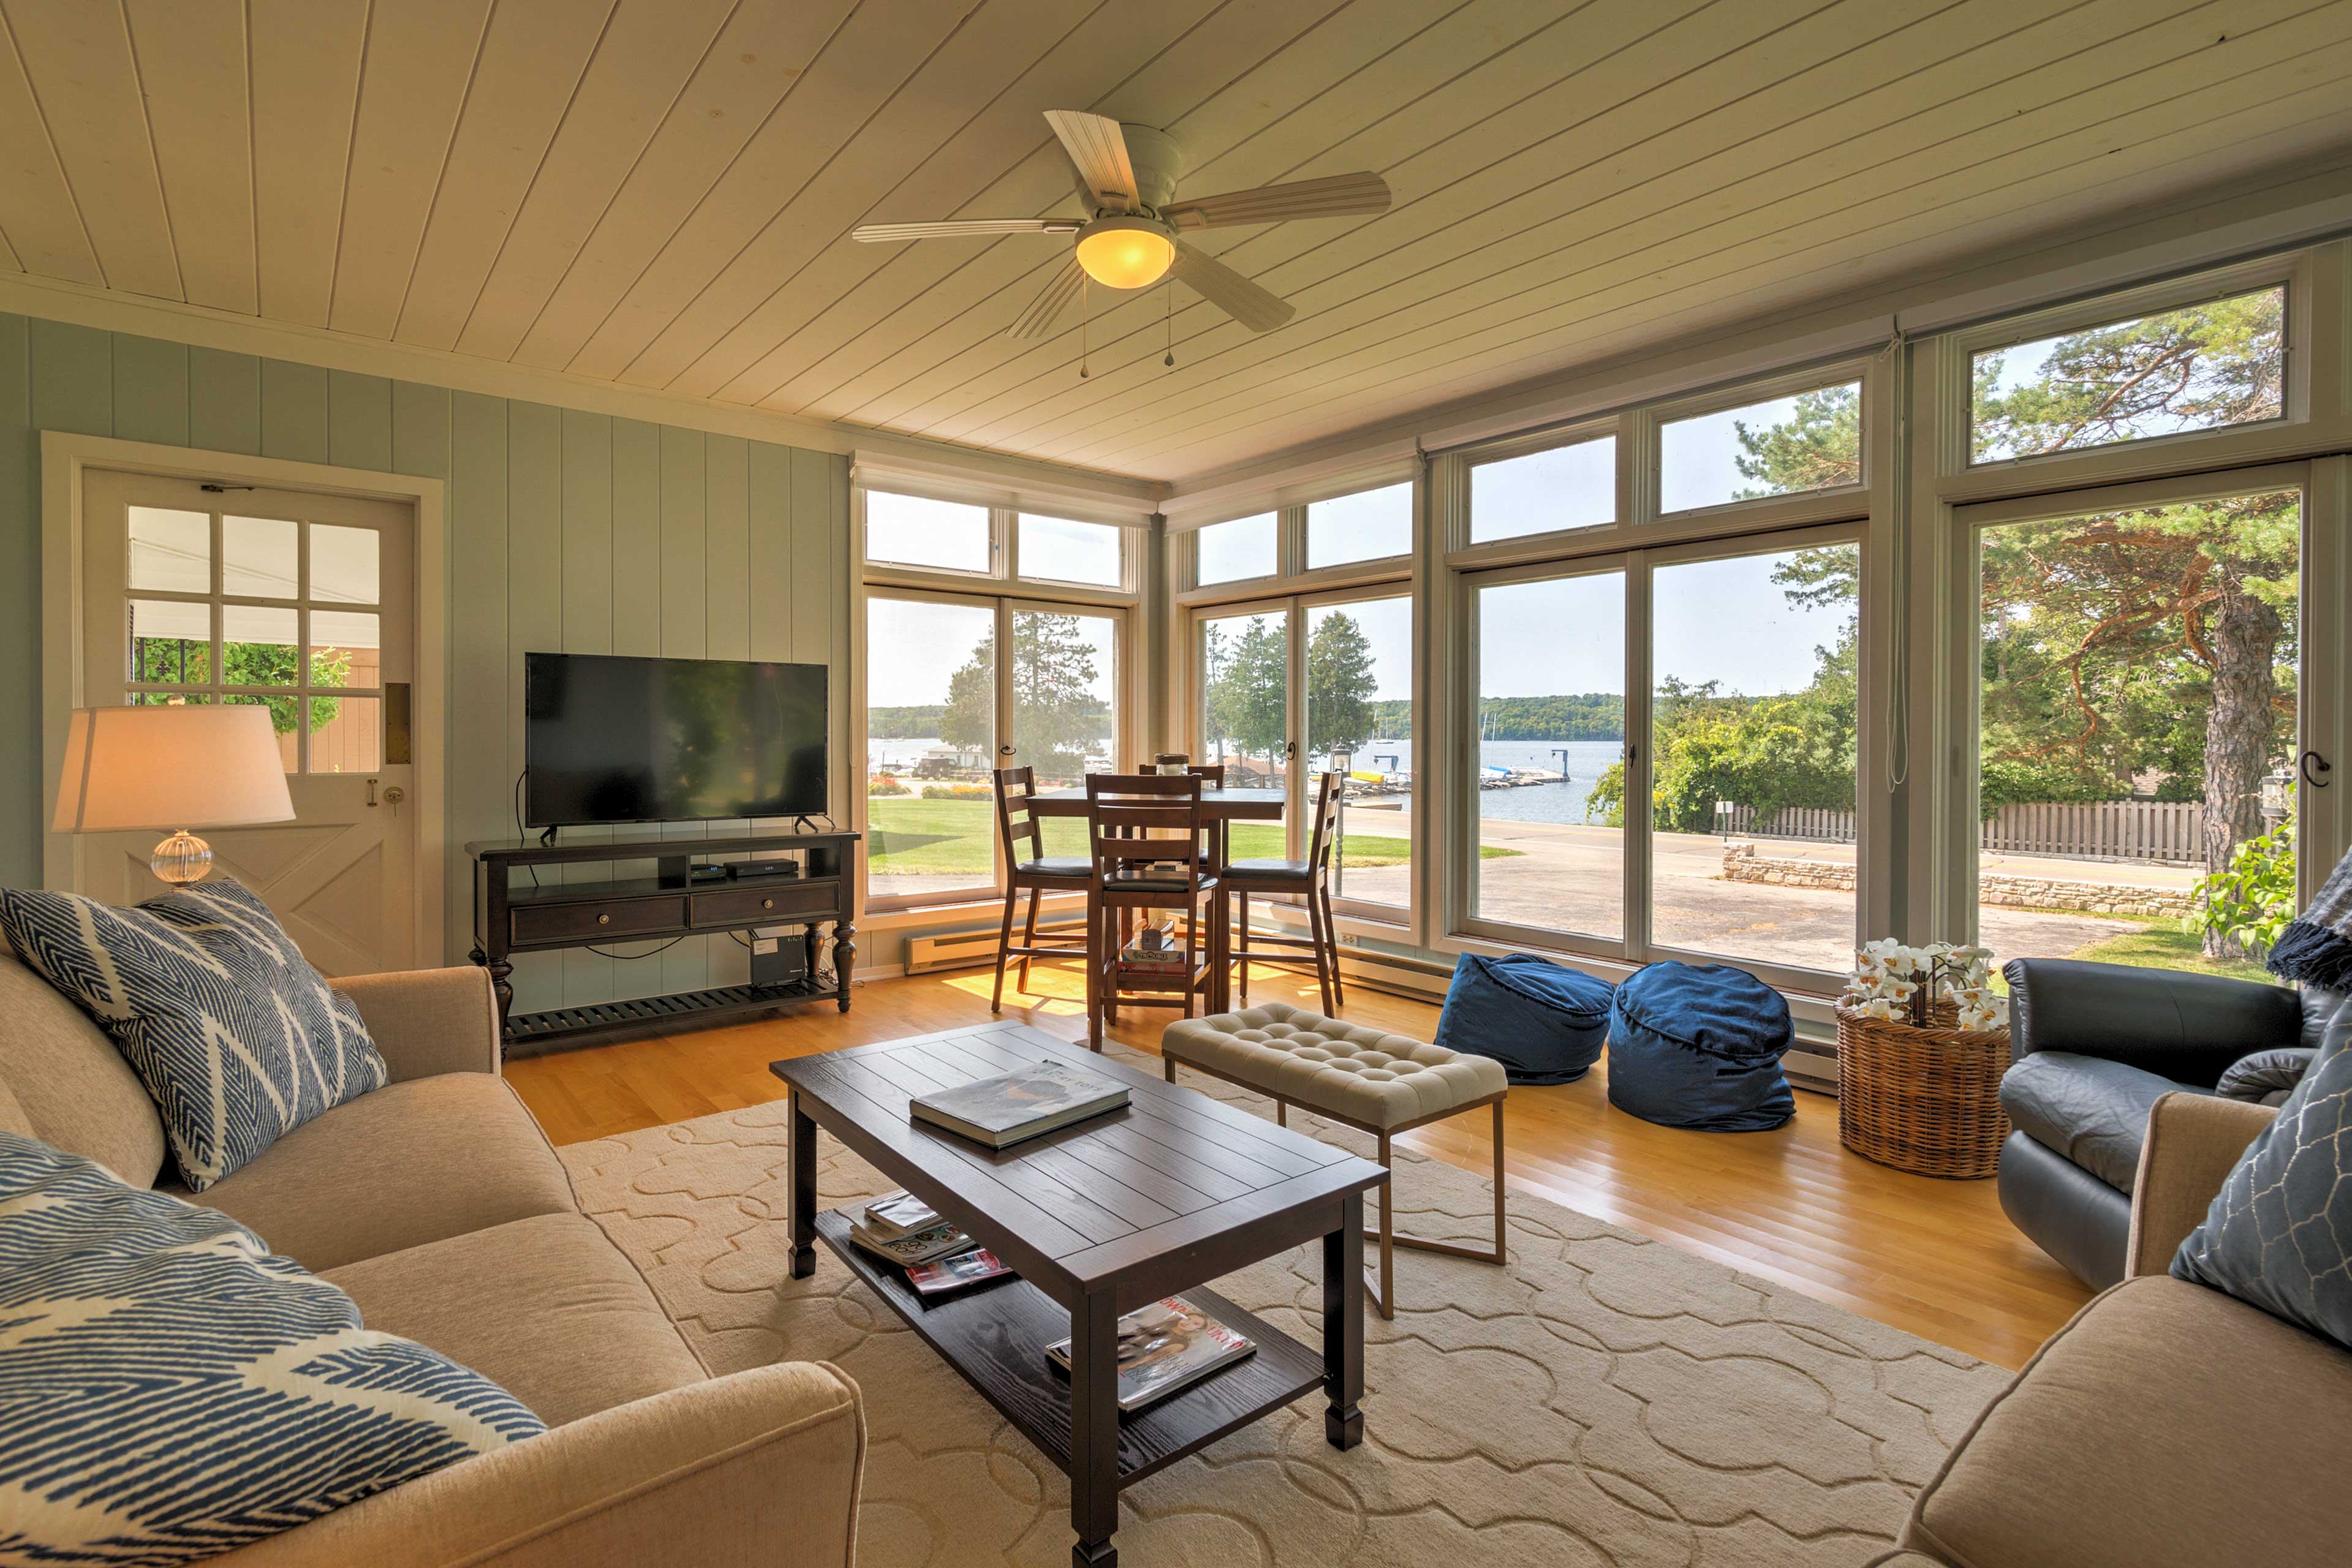 Sit in the sun room, watch TV and enjoy the harbor views!